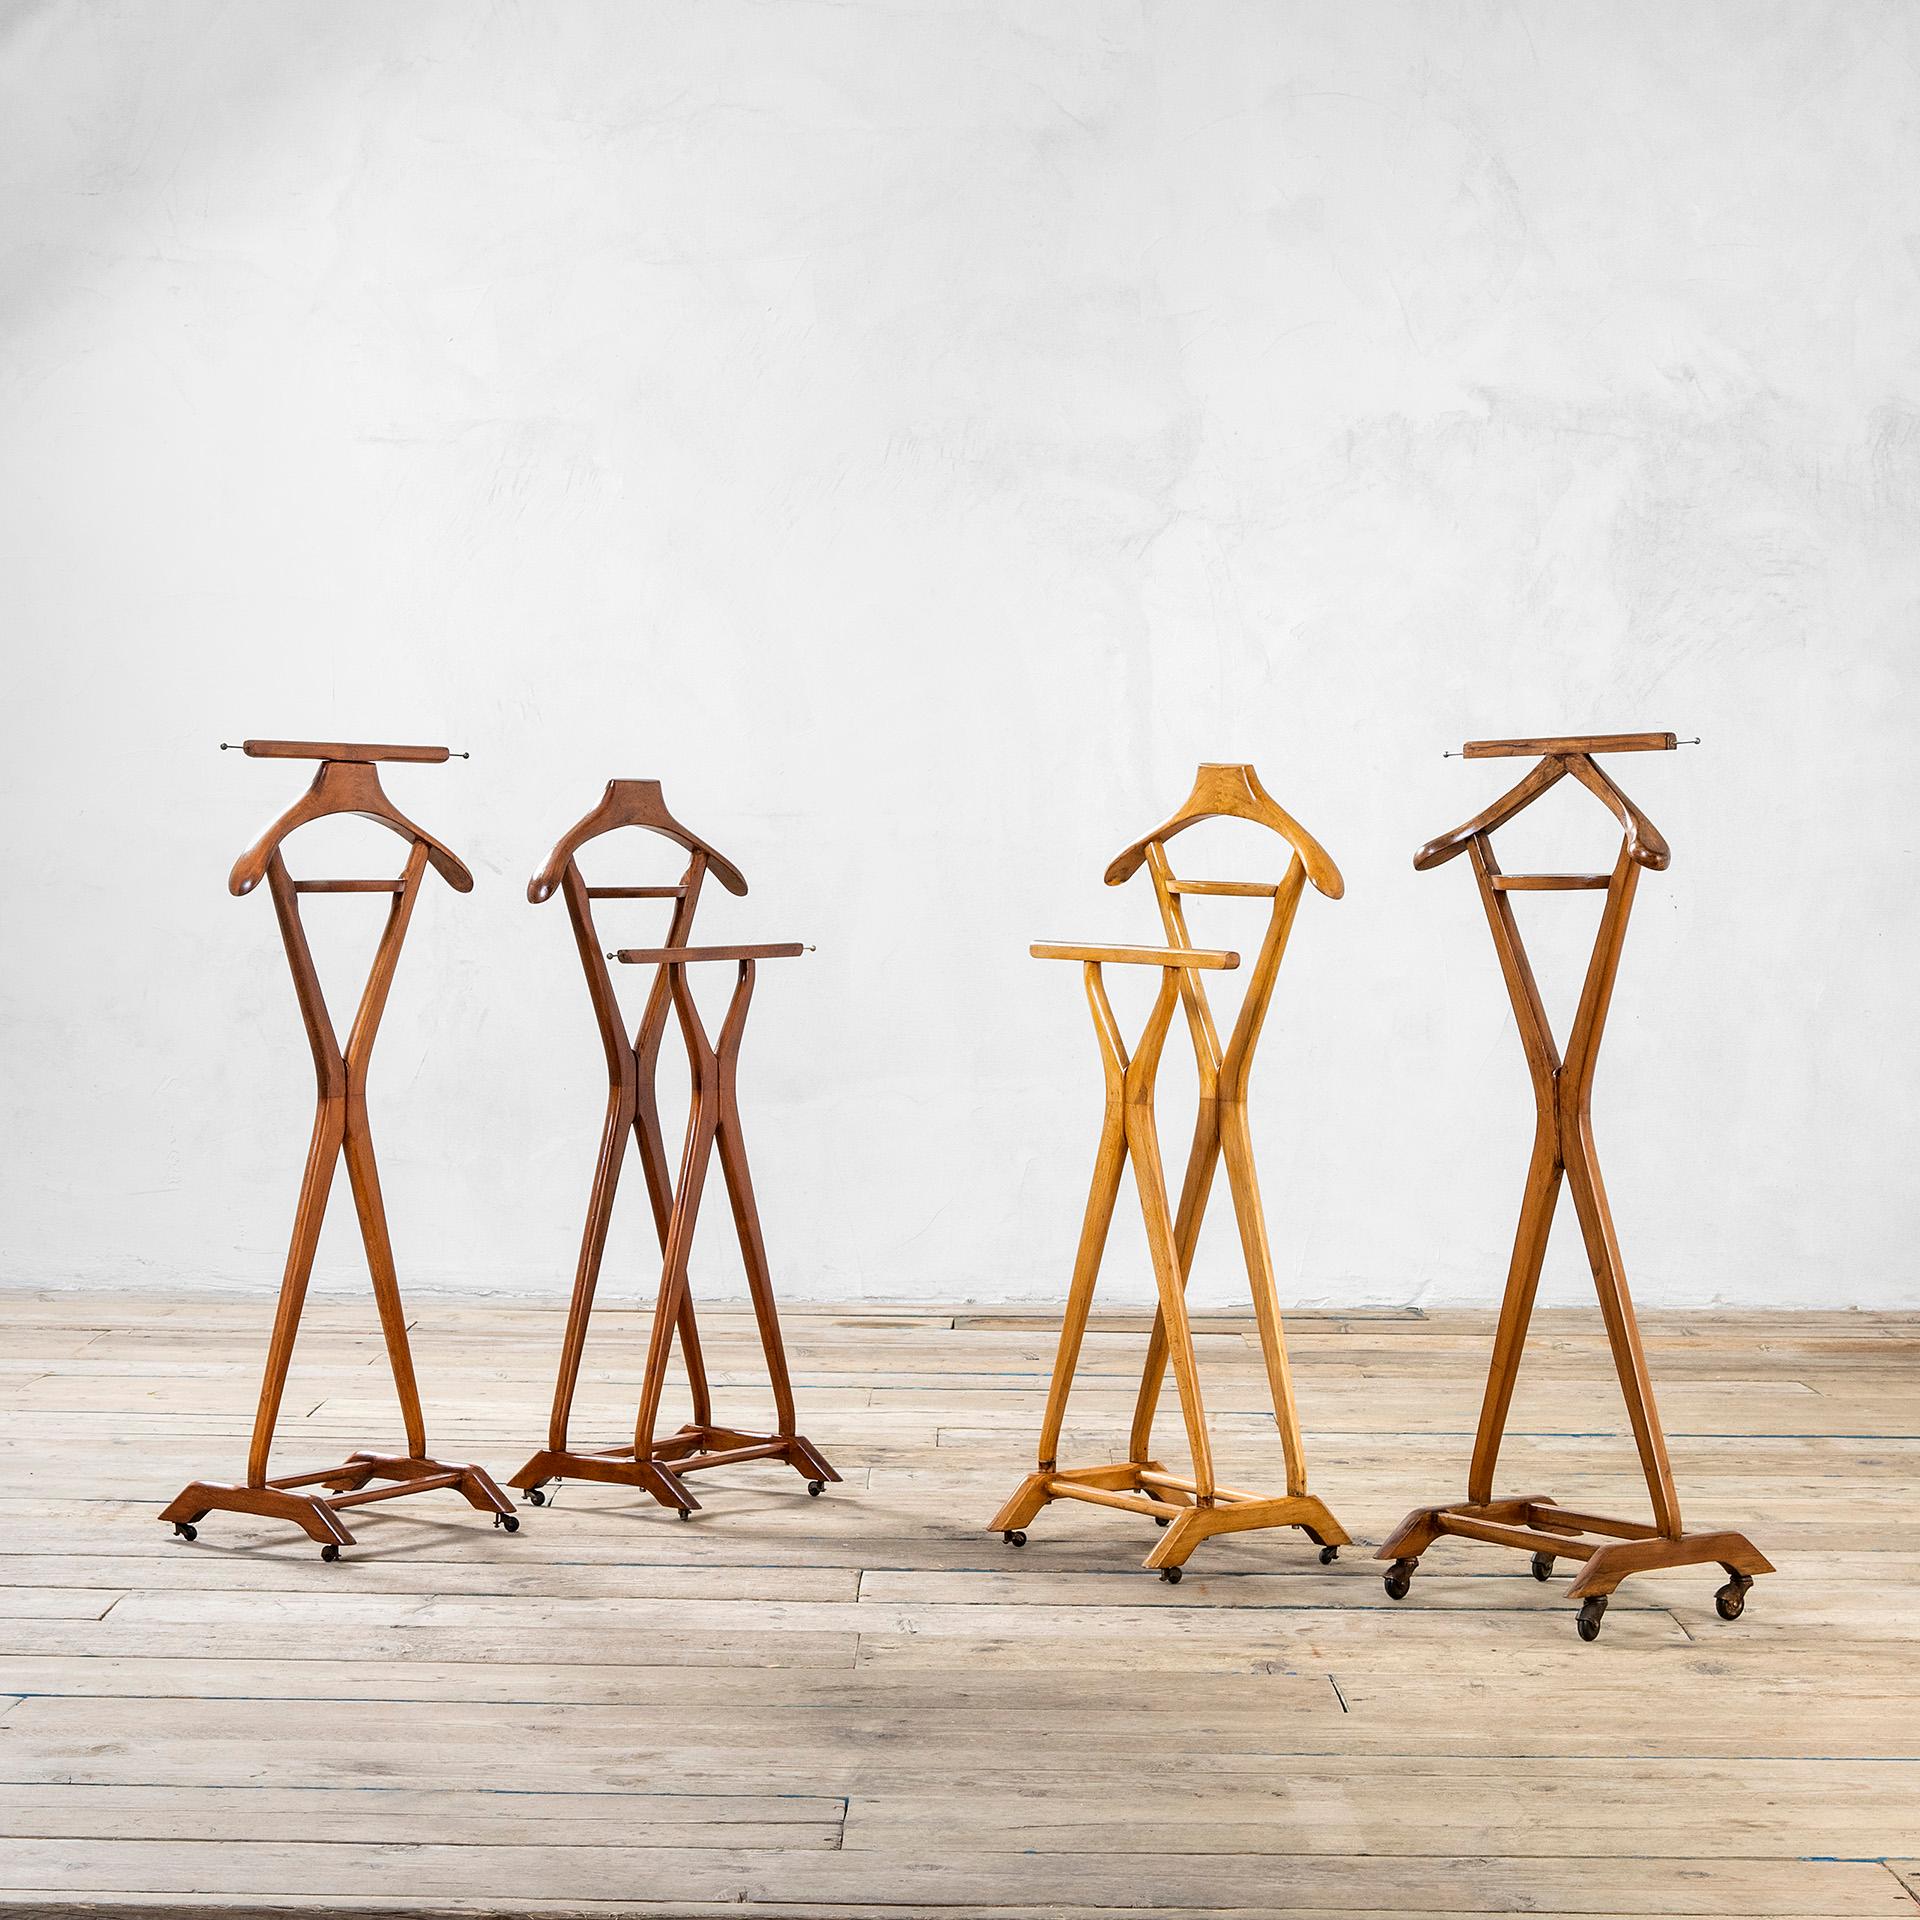 20th Century Ico Parisi Single Coat Rack in Wood with Metal Casters, Brown 1950s For Sale 2